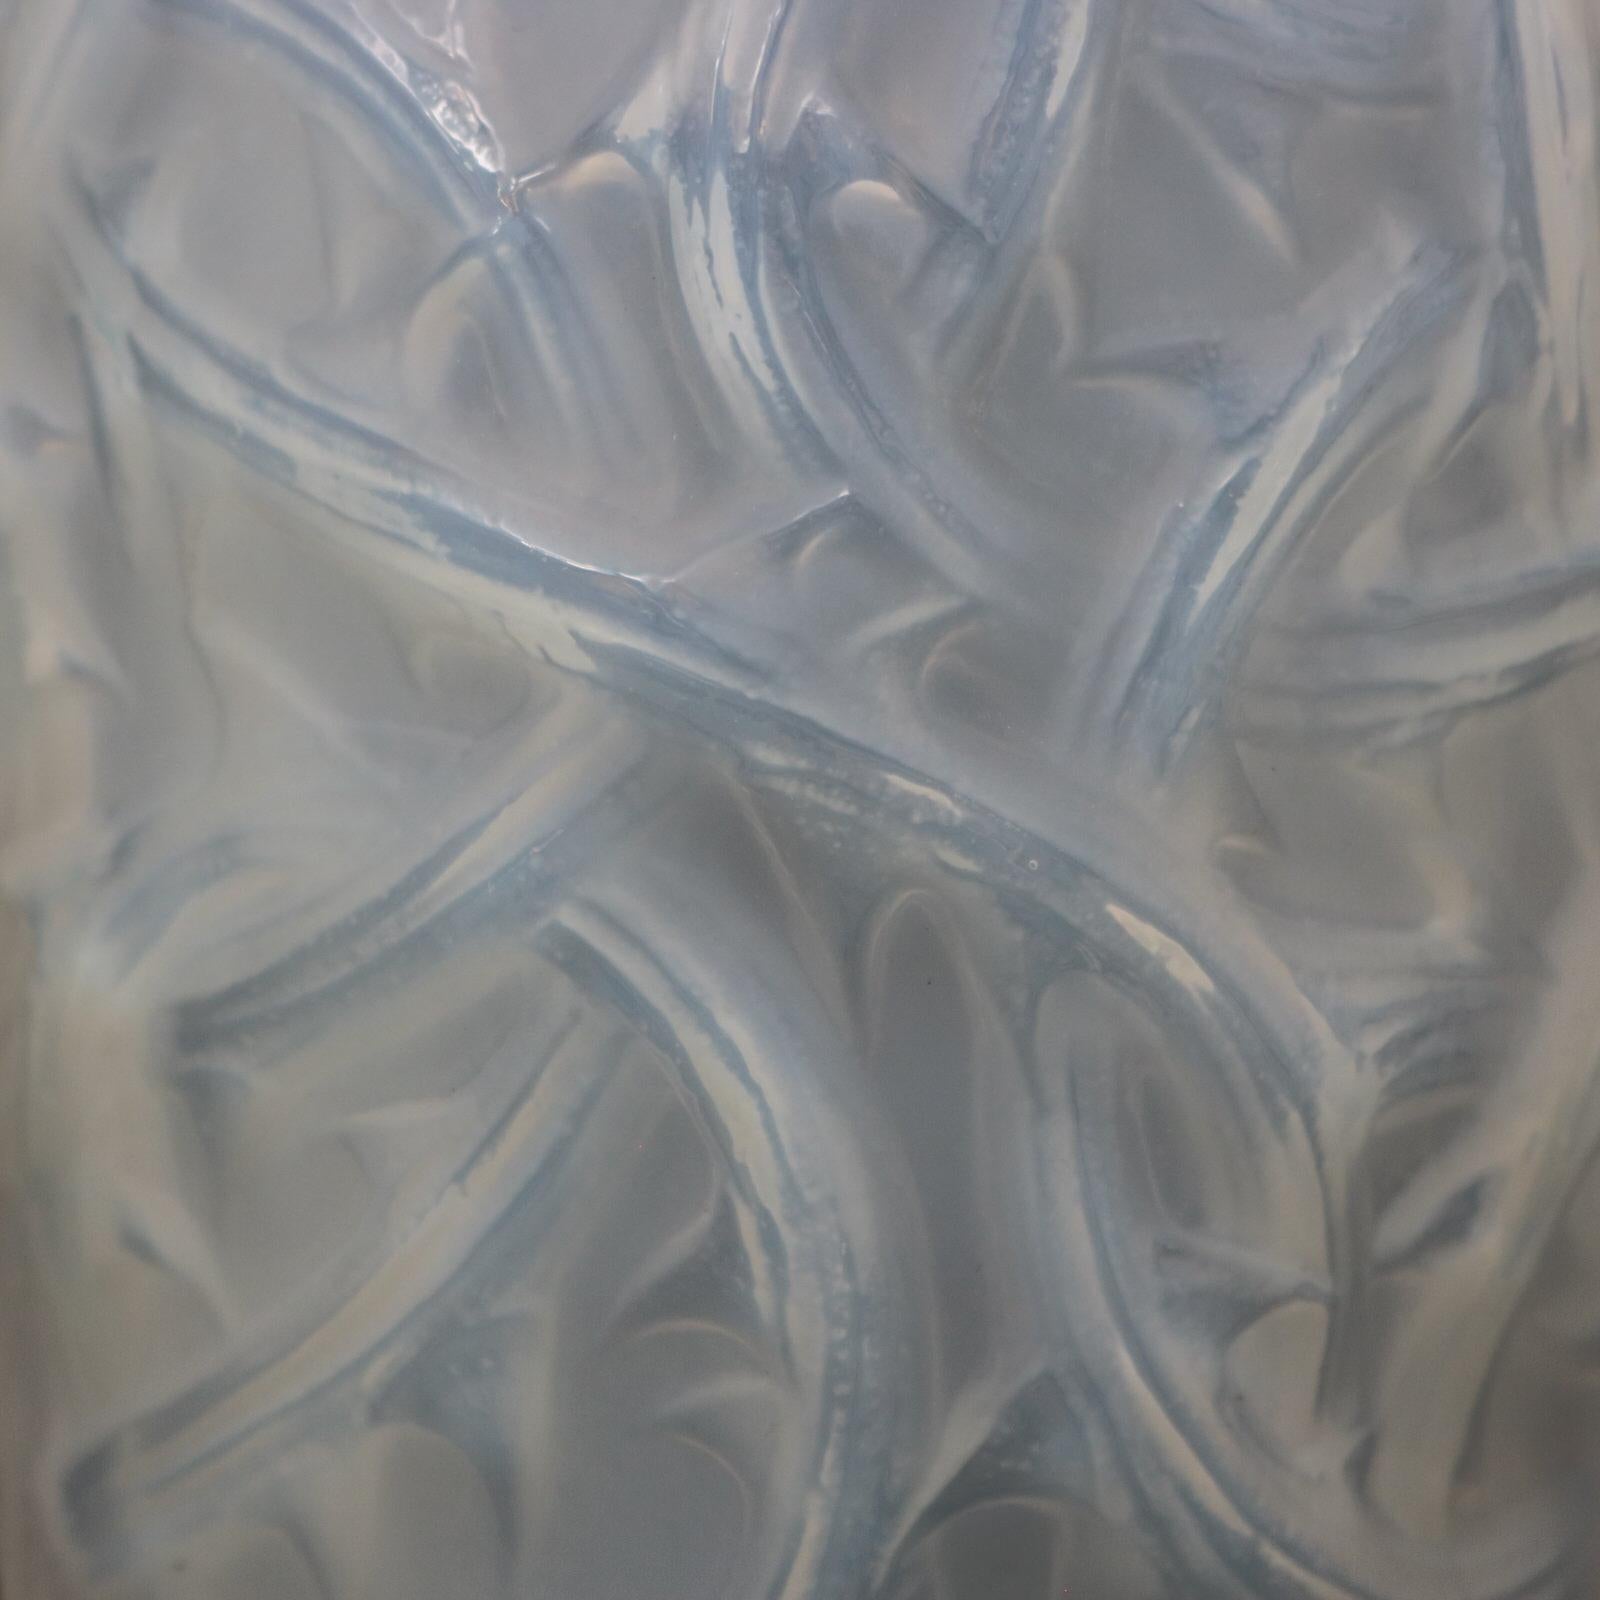 Rene Lalique Opalescent Glass 'Ronces' Vase In Excellent Condition For Sale In Chelmsford, Essex